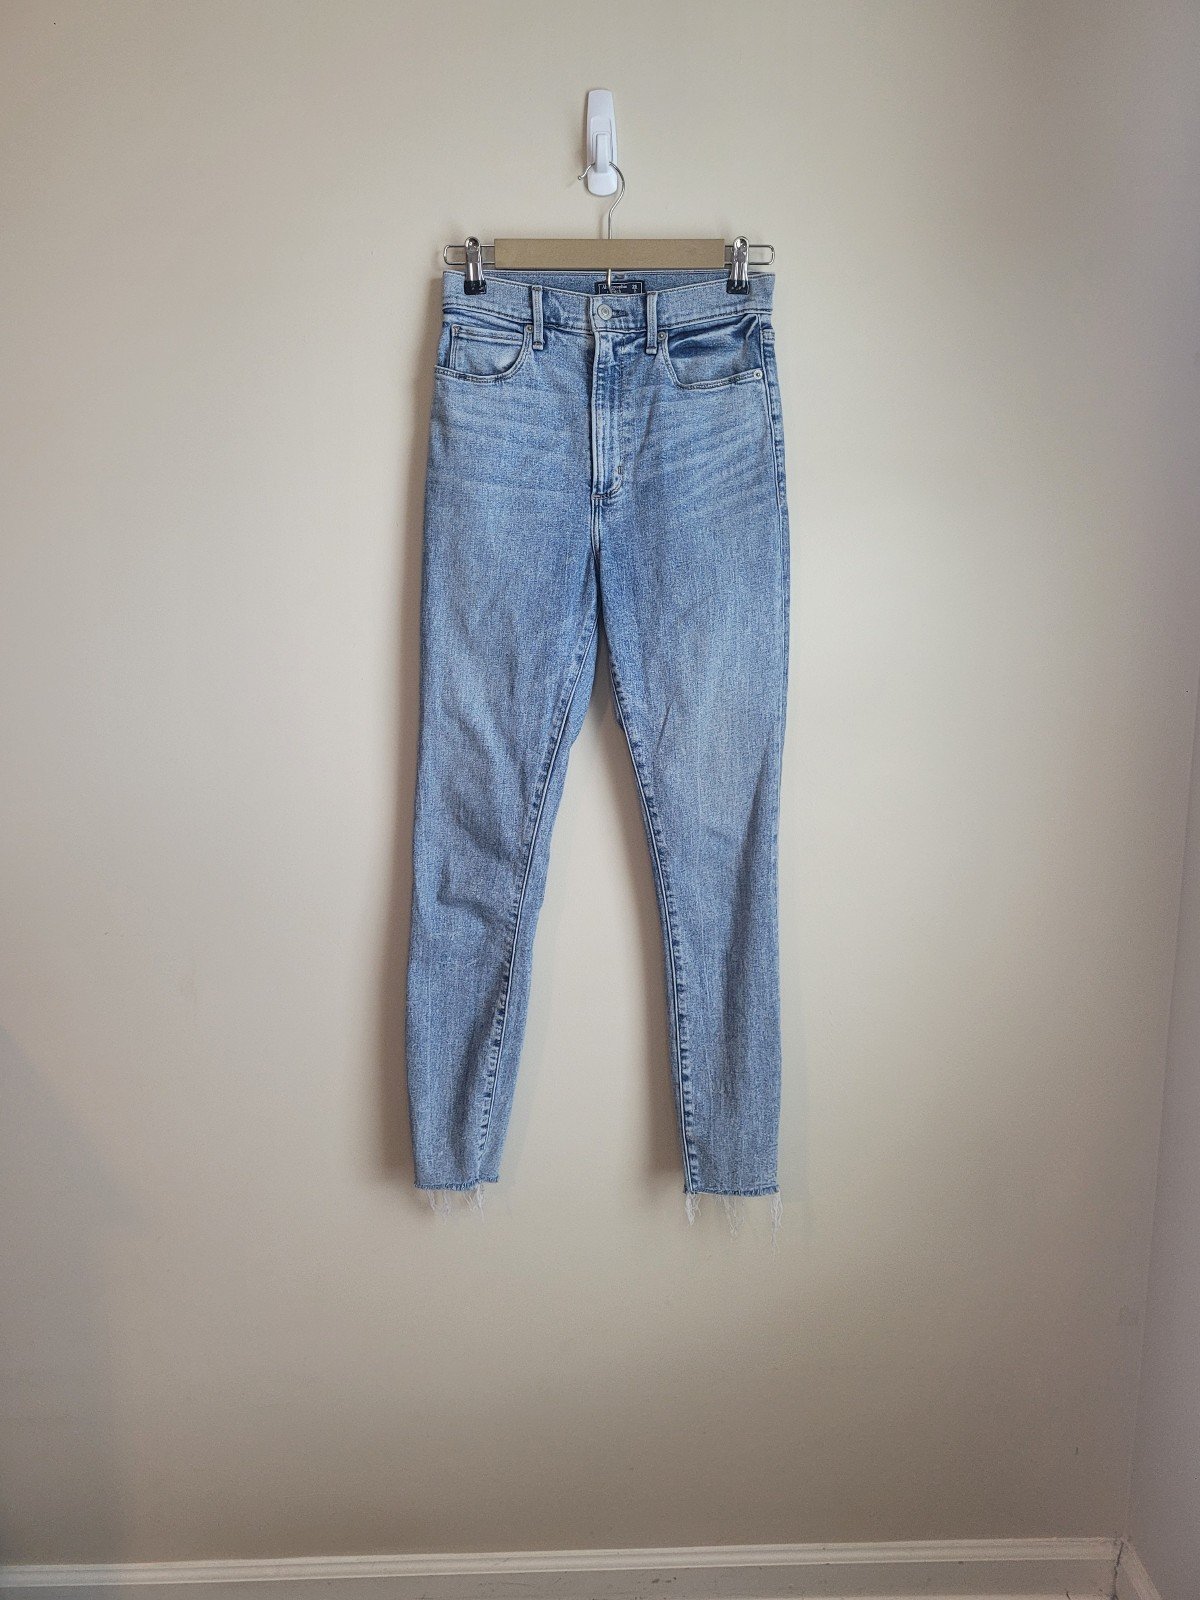 Popular Abercrombie & Fitch High-Rise Super Skinny Ankl